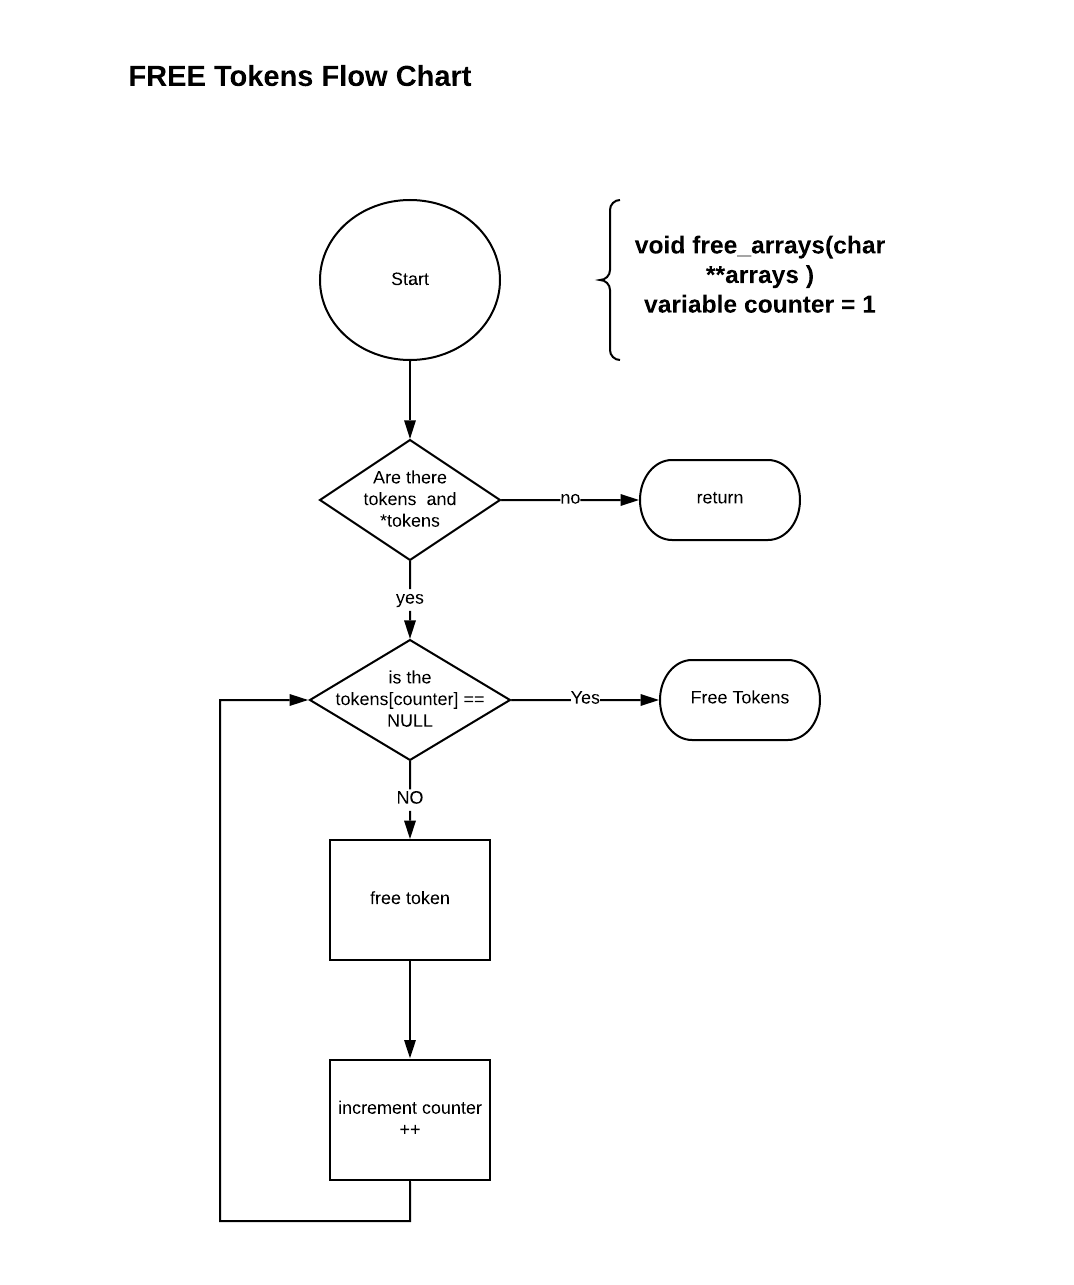 Free Tokens Flow Chart